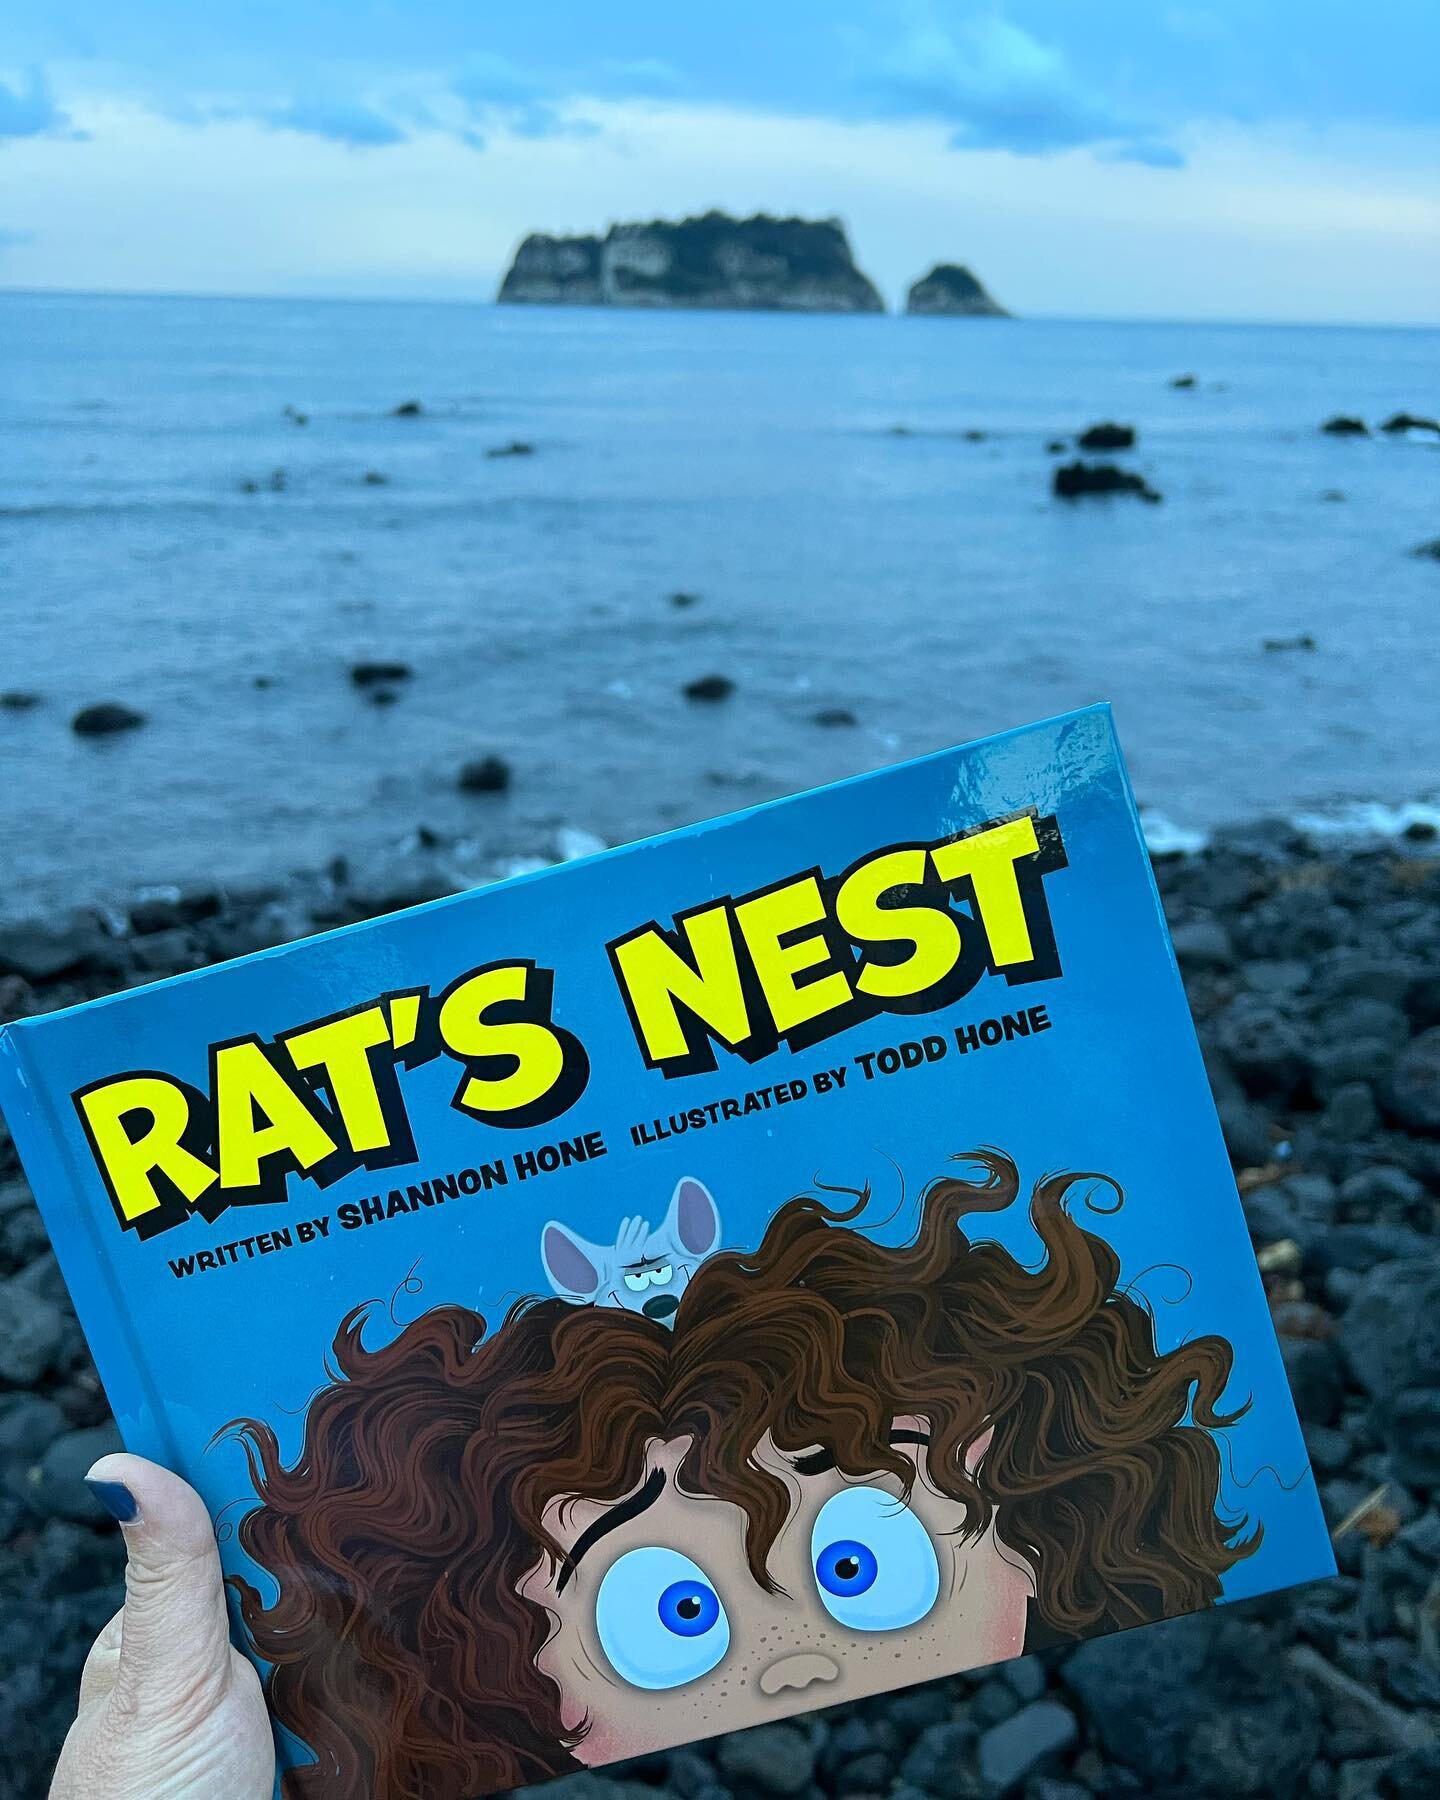 Rat&rsquo;s Nest was officially released October 4th and my heart is full of gratitude for everyone who made it possible. 

Thank you to my great-grandmother Ruby for inspiring the story, my incredibly talented husband for illustrating it, my sister 